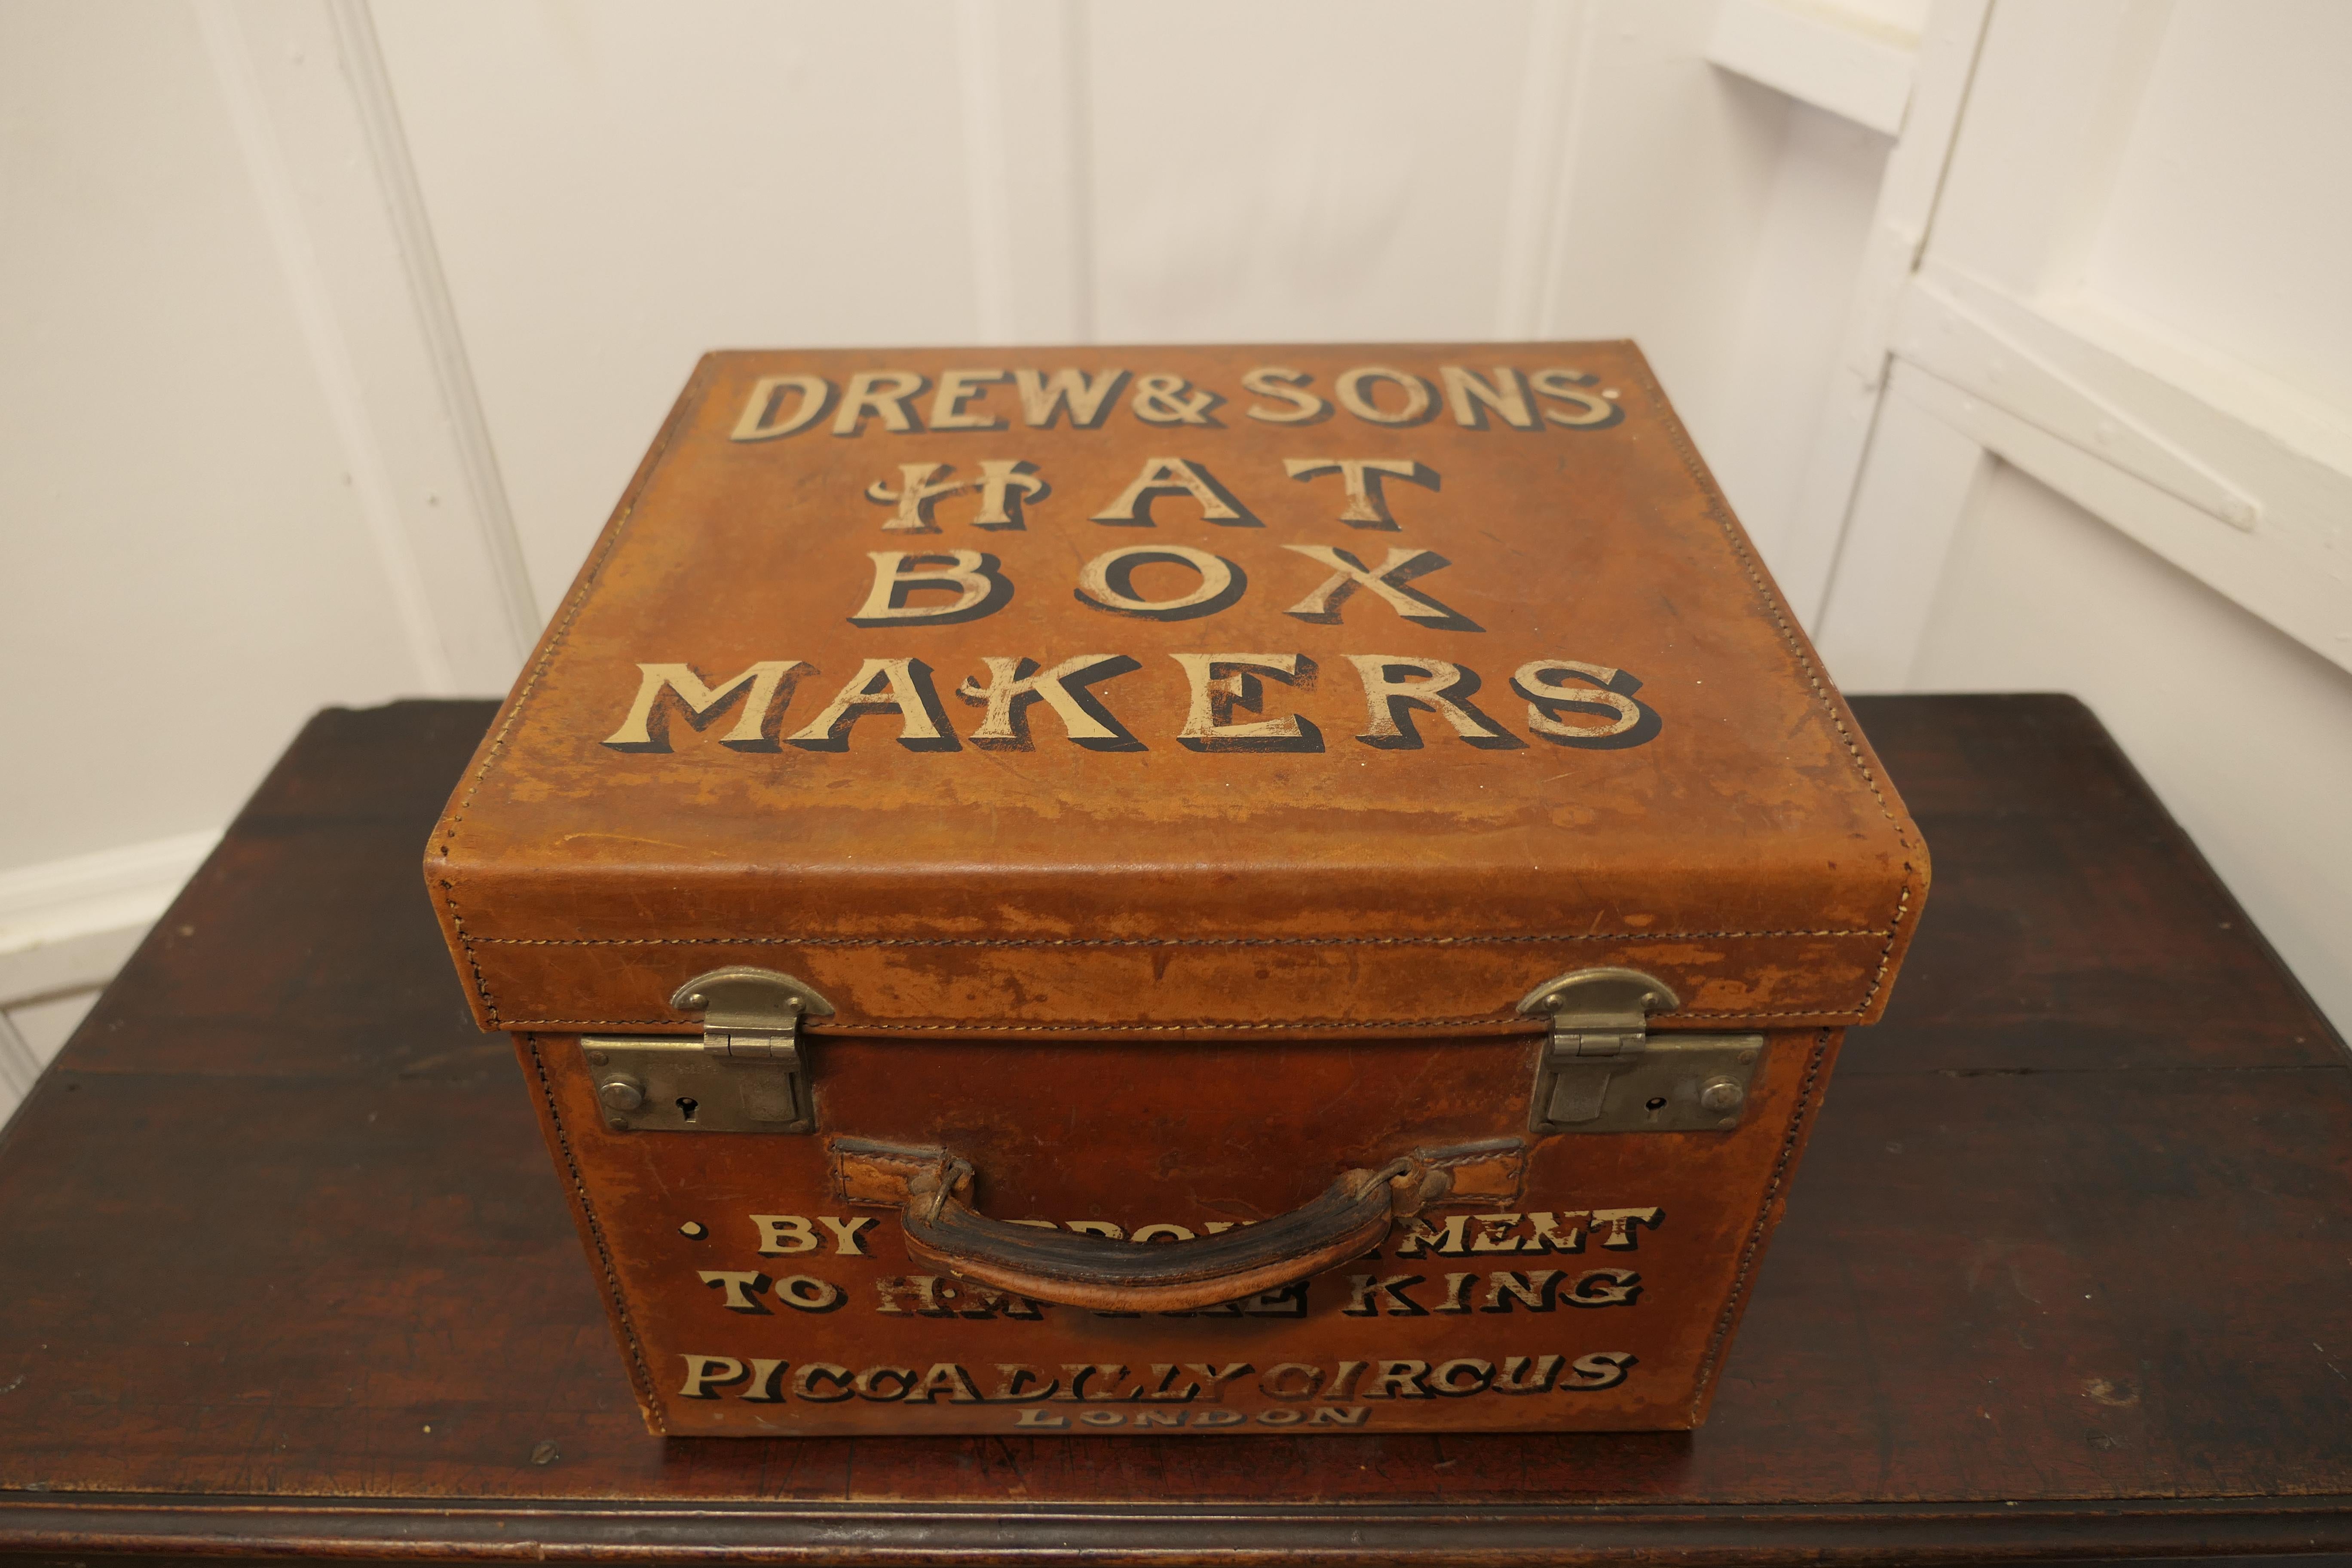 Edwardian Salesman’s Sample Hat Box by Drew and Sons Trunk Makers

This is a unique piece, it is a 19th Century Traveling salesman sample showing the quality of leather suitcases and luggage produced by Drew and Sons of Piccadilly
It has pockets to